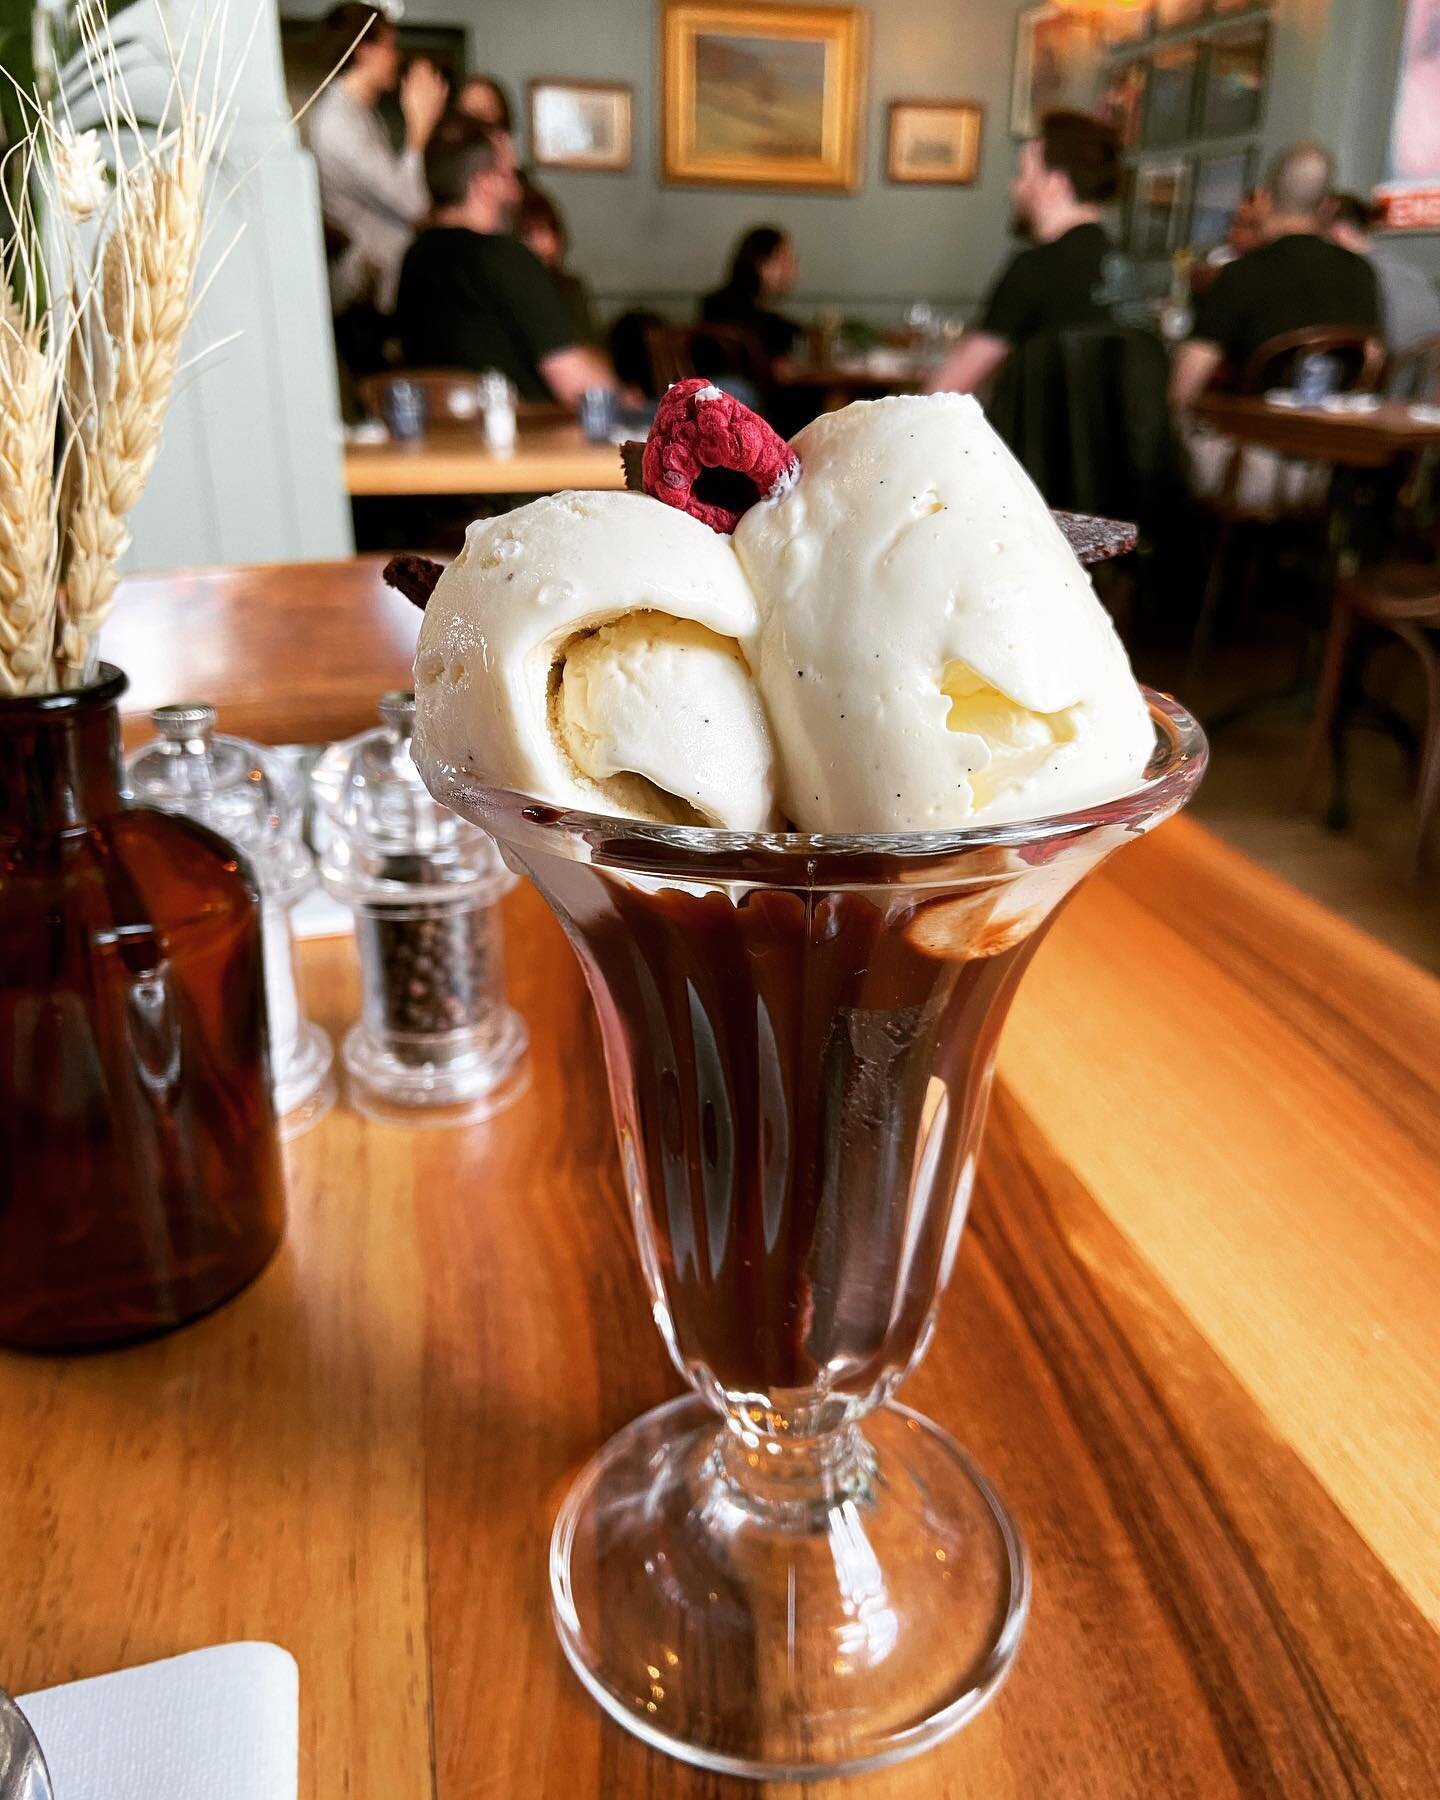 Fancy some dessert? Try our lovely dark chocolate and raspberry sundae. Raspberry sorbet, chocolate brownie, freeze dried raspberries, chantilly cream and chocolate sauce. It maybe Thursday but it&rsquo;s always Sunday here. 
.
.
.
.
.#dessert#sundae